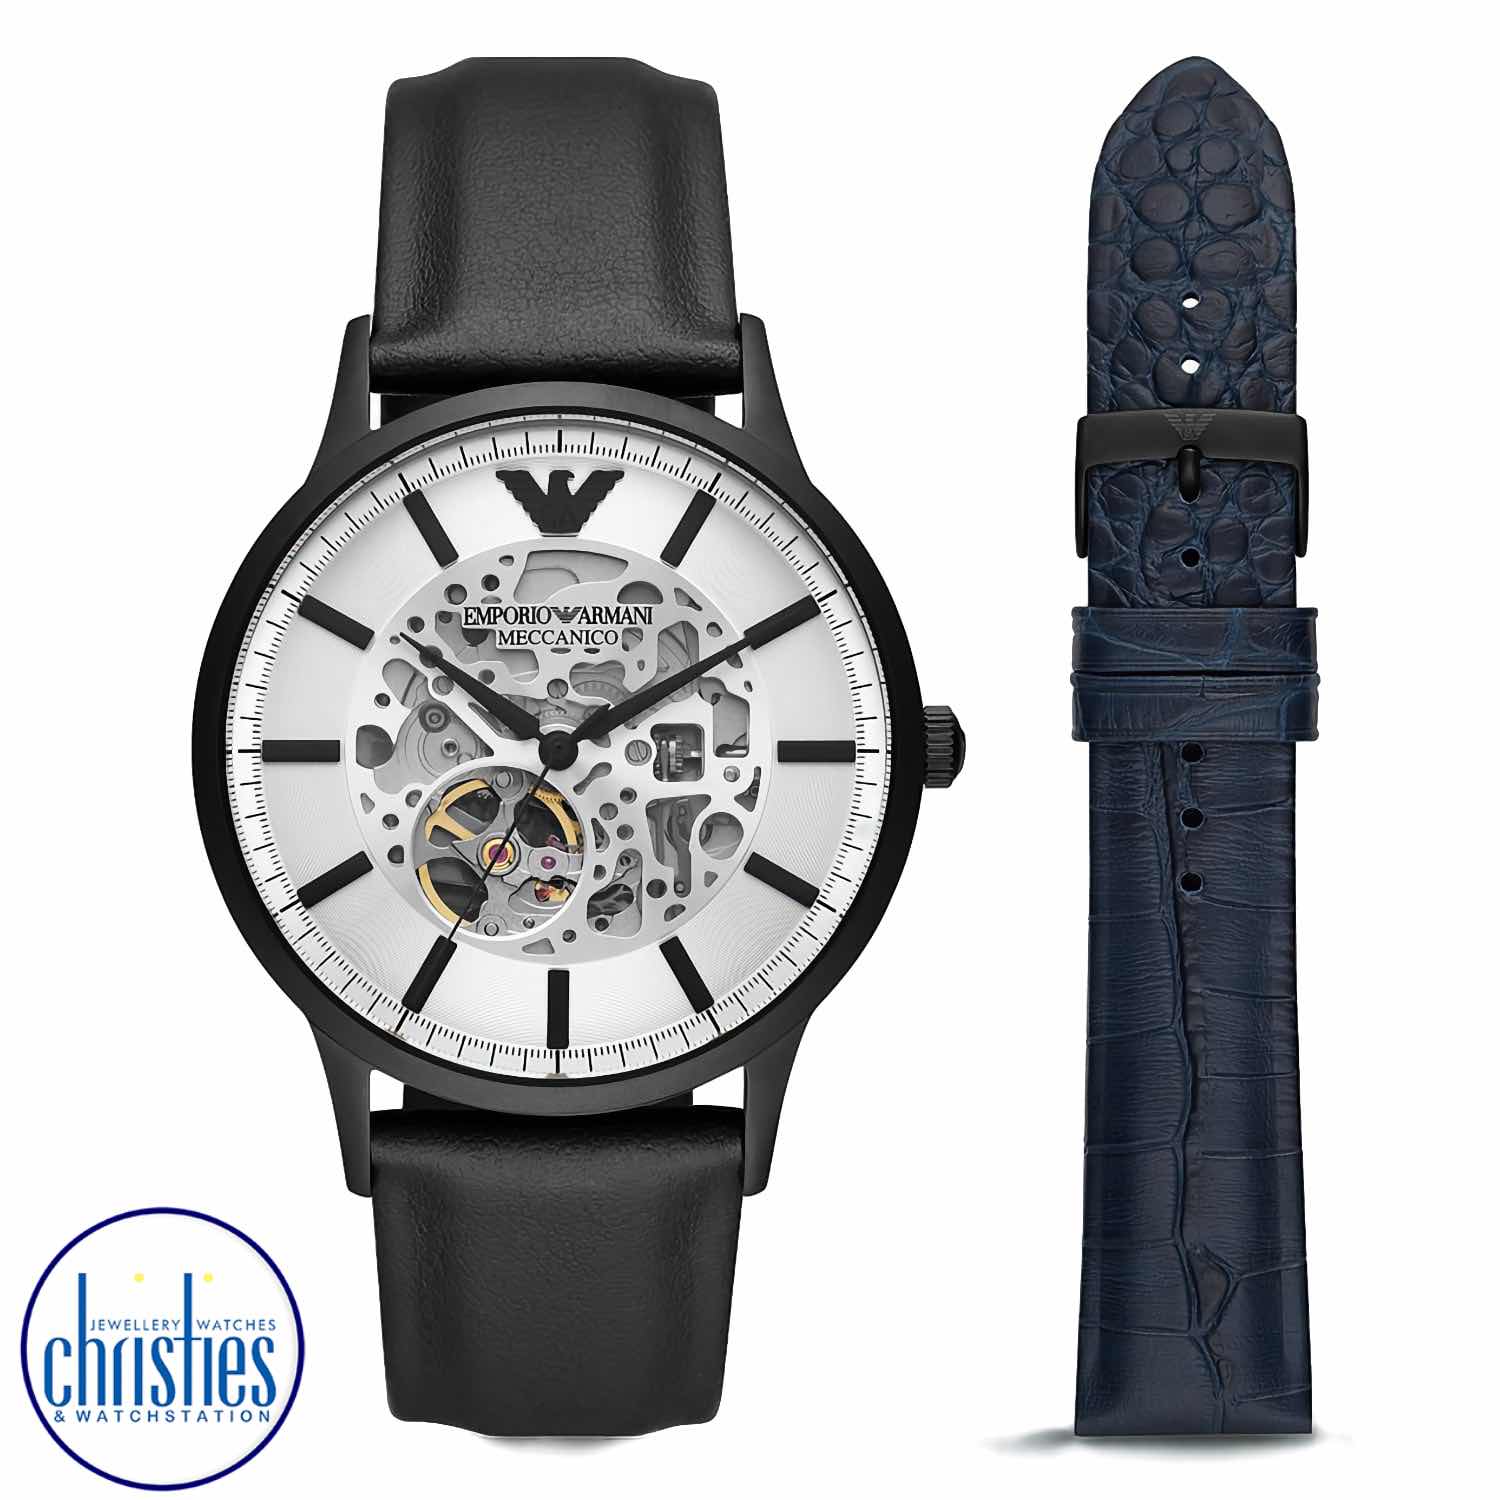 AR80060 Emporio Armani Automatic Three-Hand OBW Watch with Blue and Black Leather Interchangeable Strap Set. Armani Exchange is a sub-brand to Armani, focusing on the younger generation.